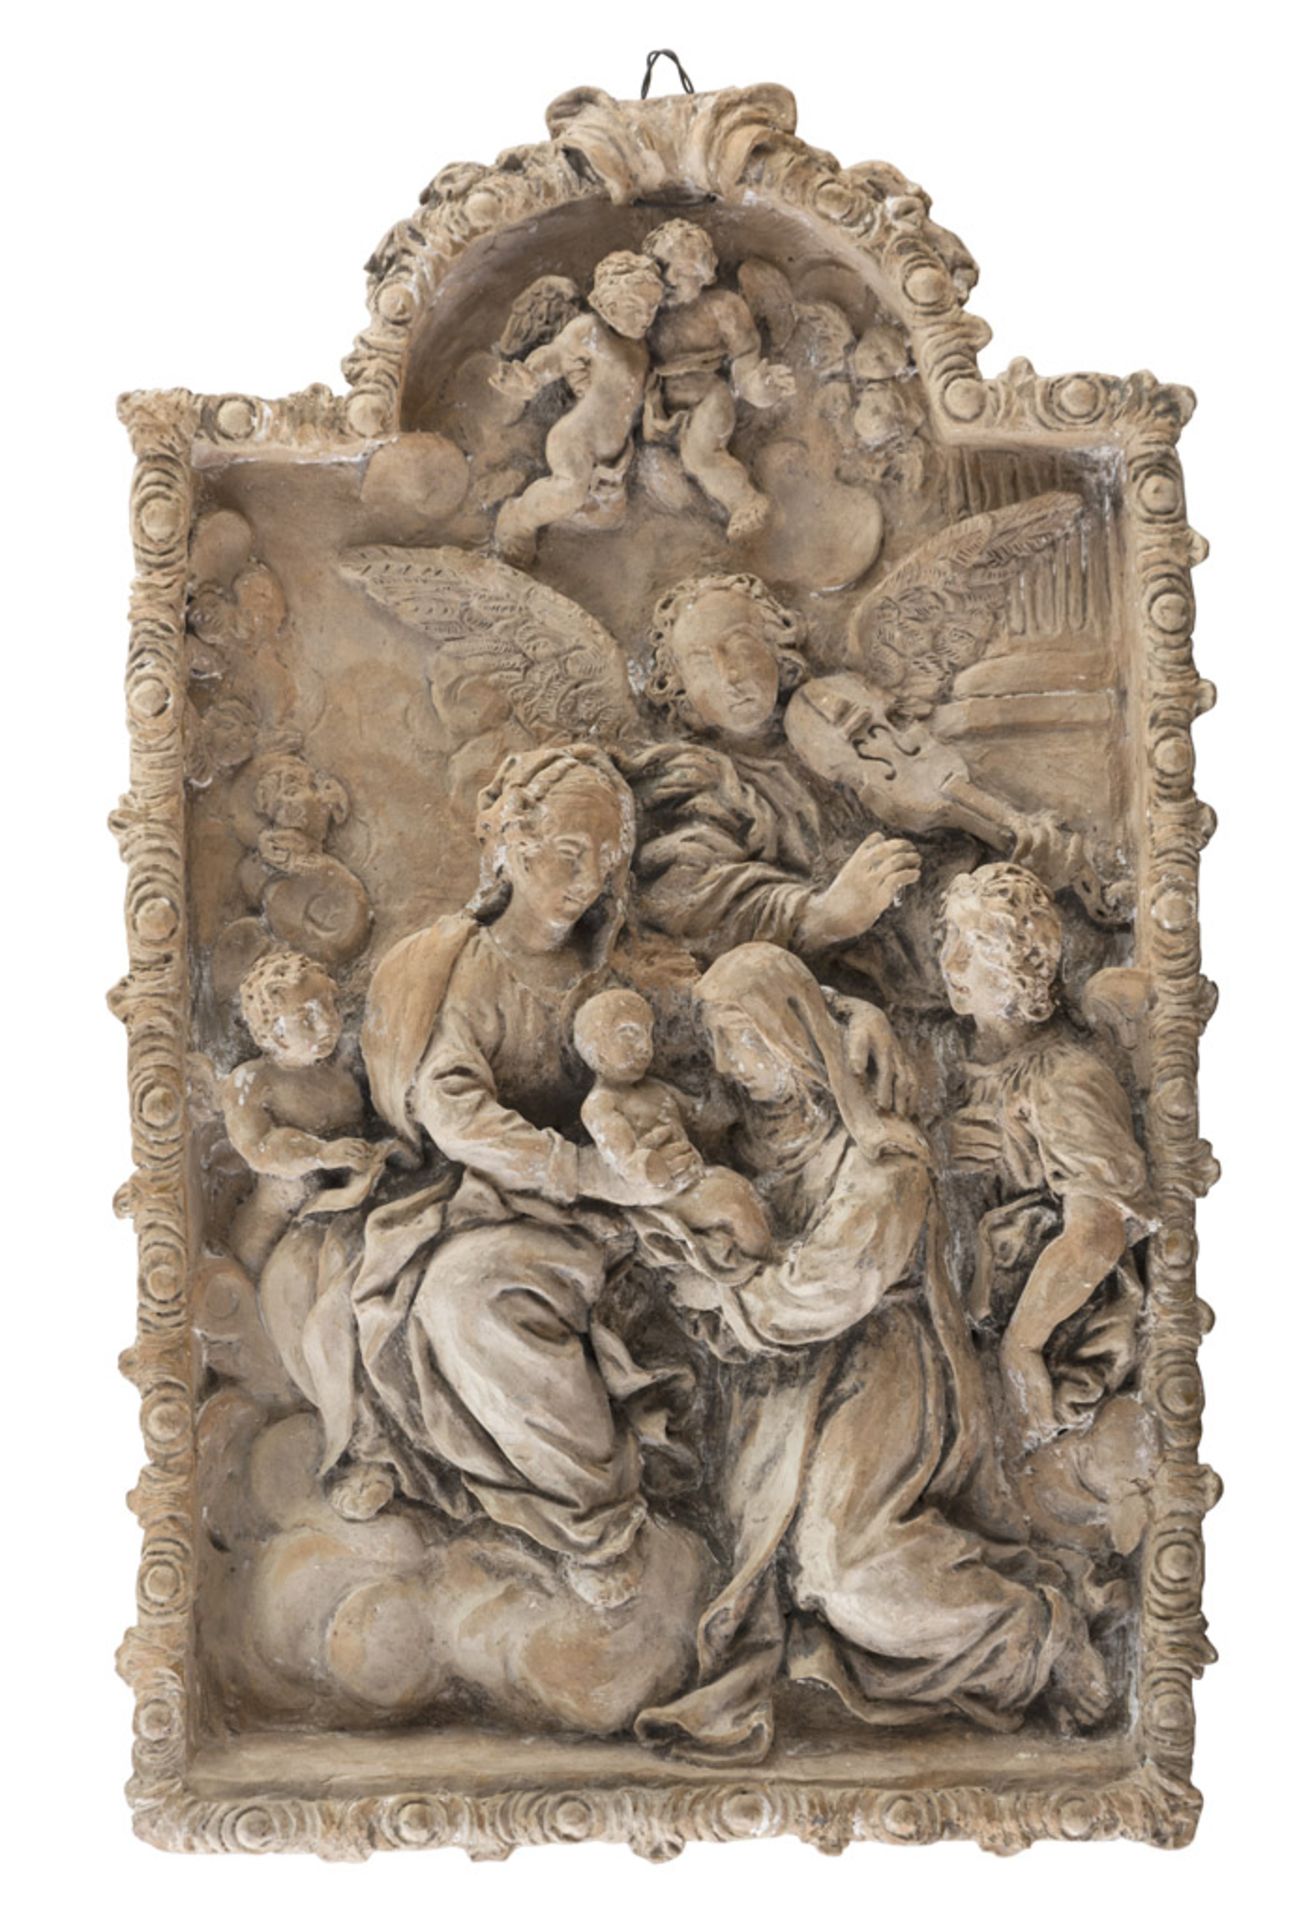 NEAPOLITAN SCULPTOR, EARLY 18TH CENTURY NATIVITY WITH ARCHANGEL High-relief sculpture in shrine